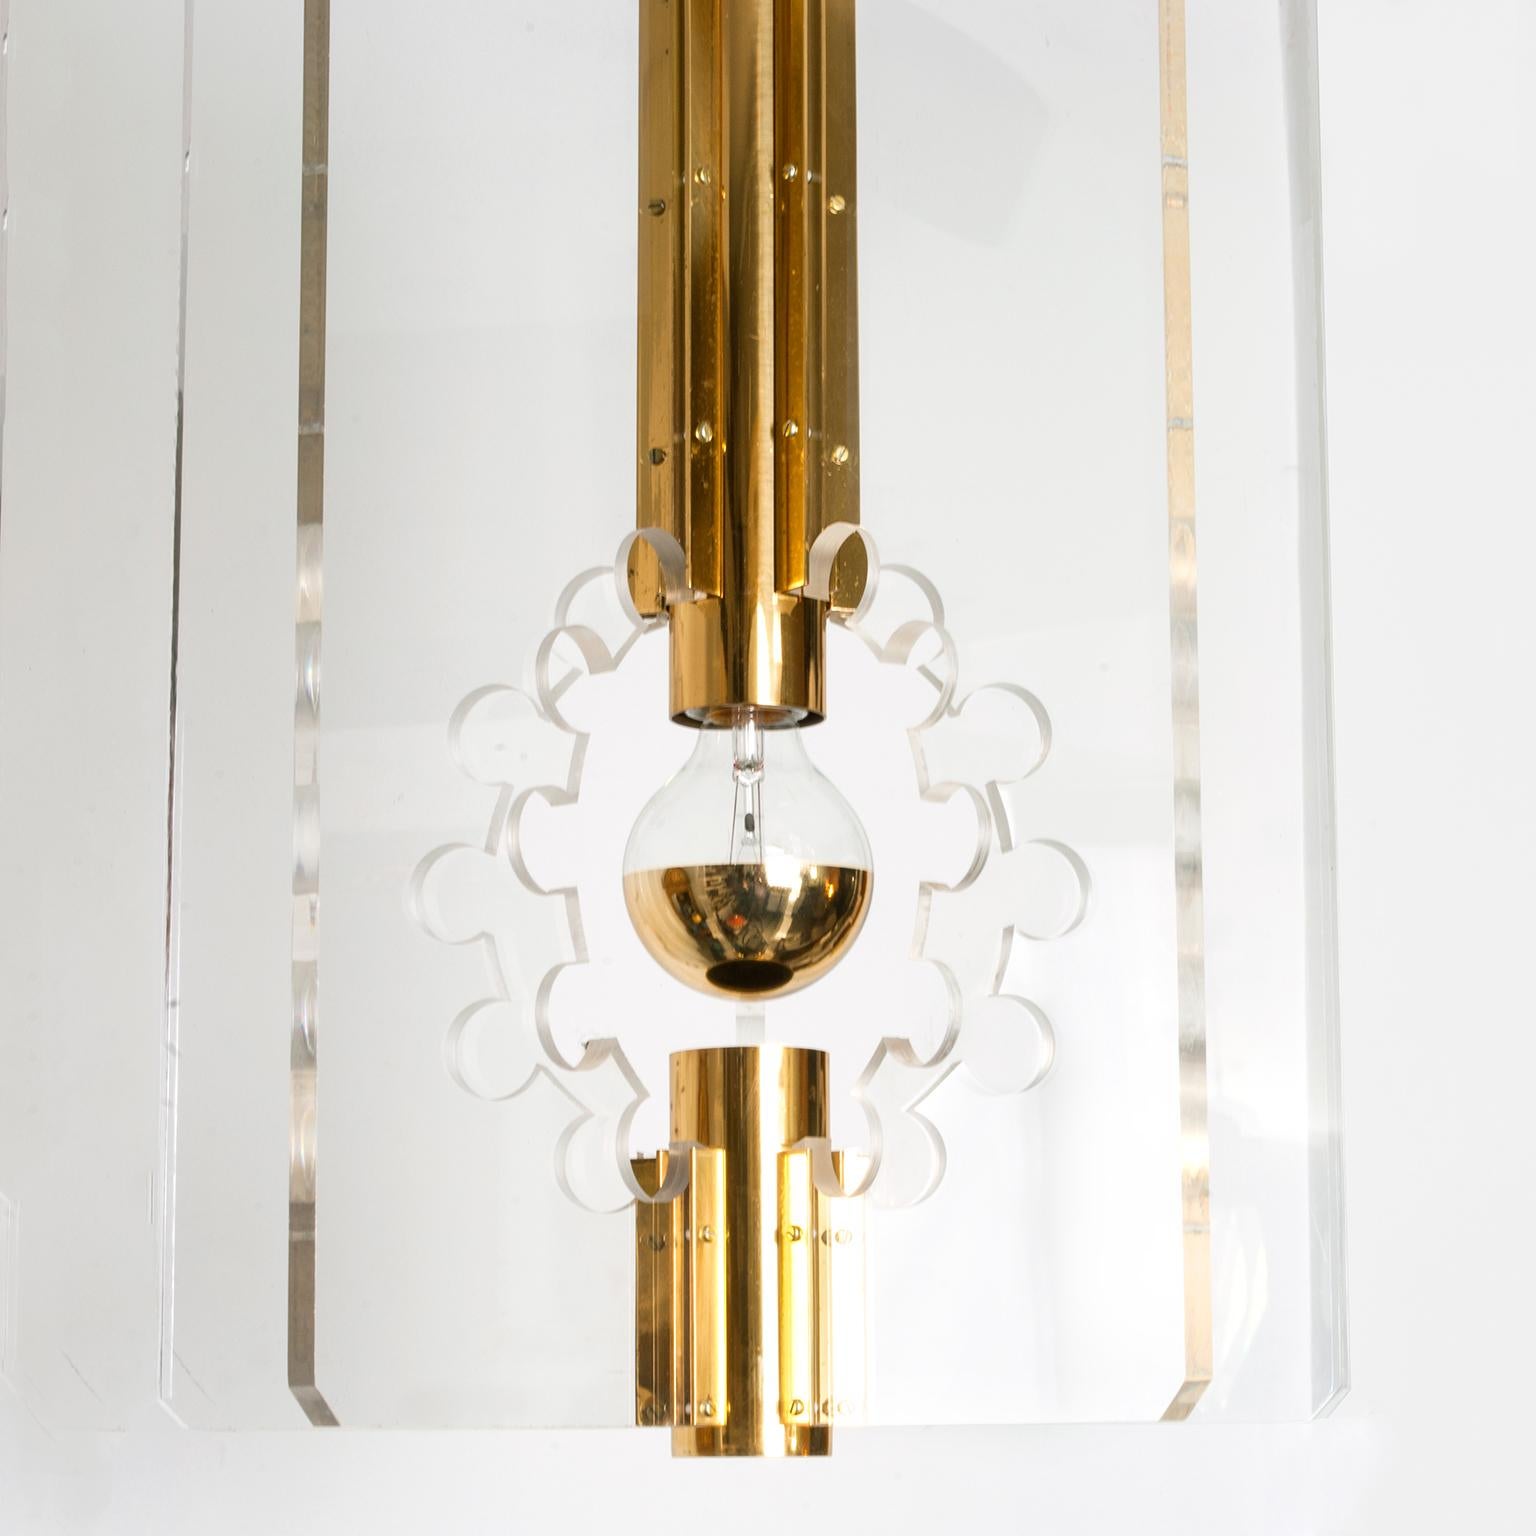 Scandinavian Modern Lucite and Brass Pendant by Hans-Agne Jakobsson for Markaryd In Good Condition For Sale In New York, NY